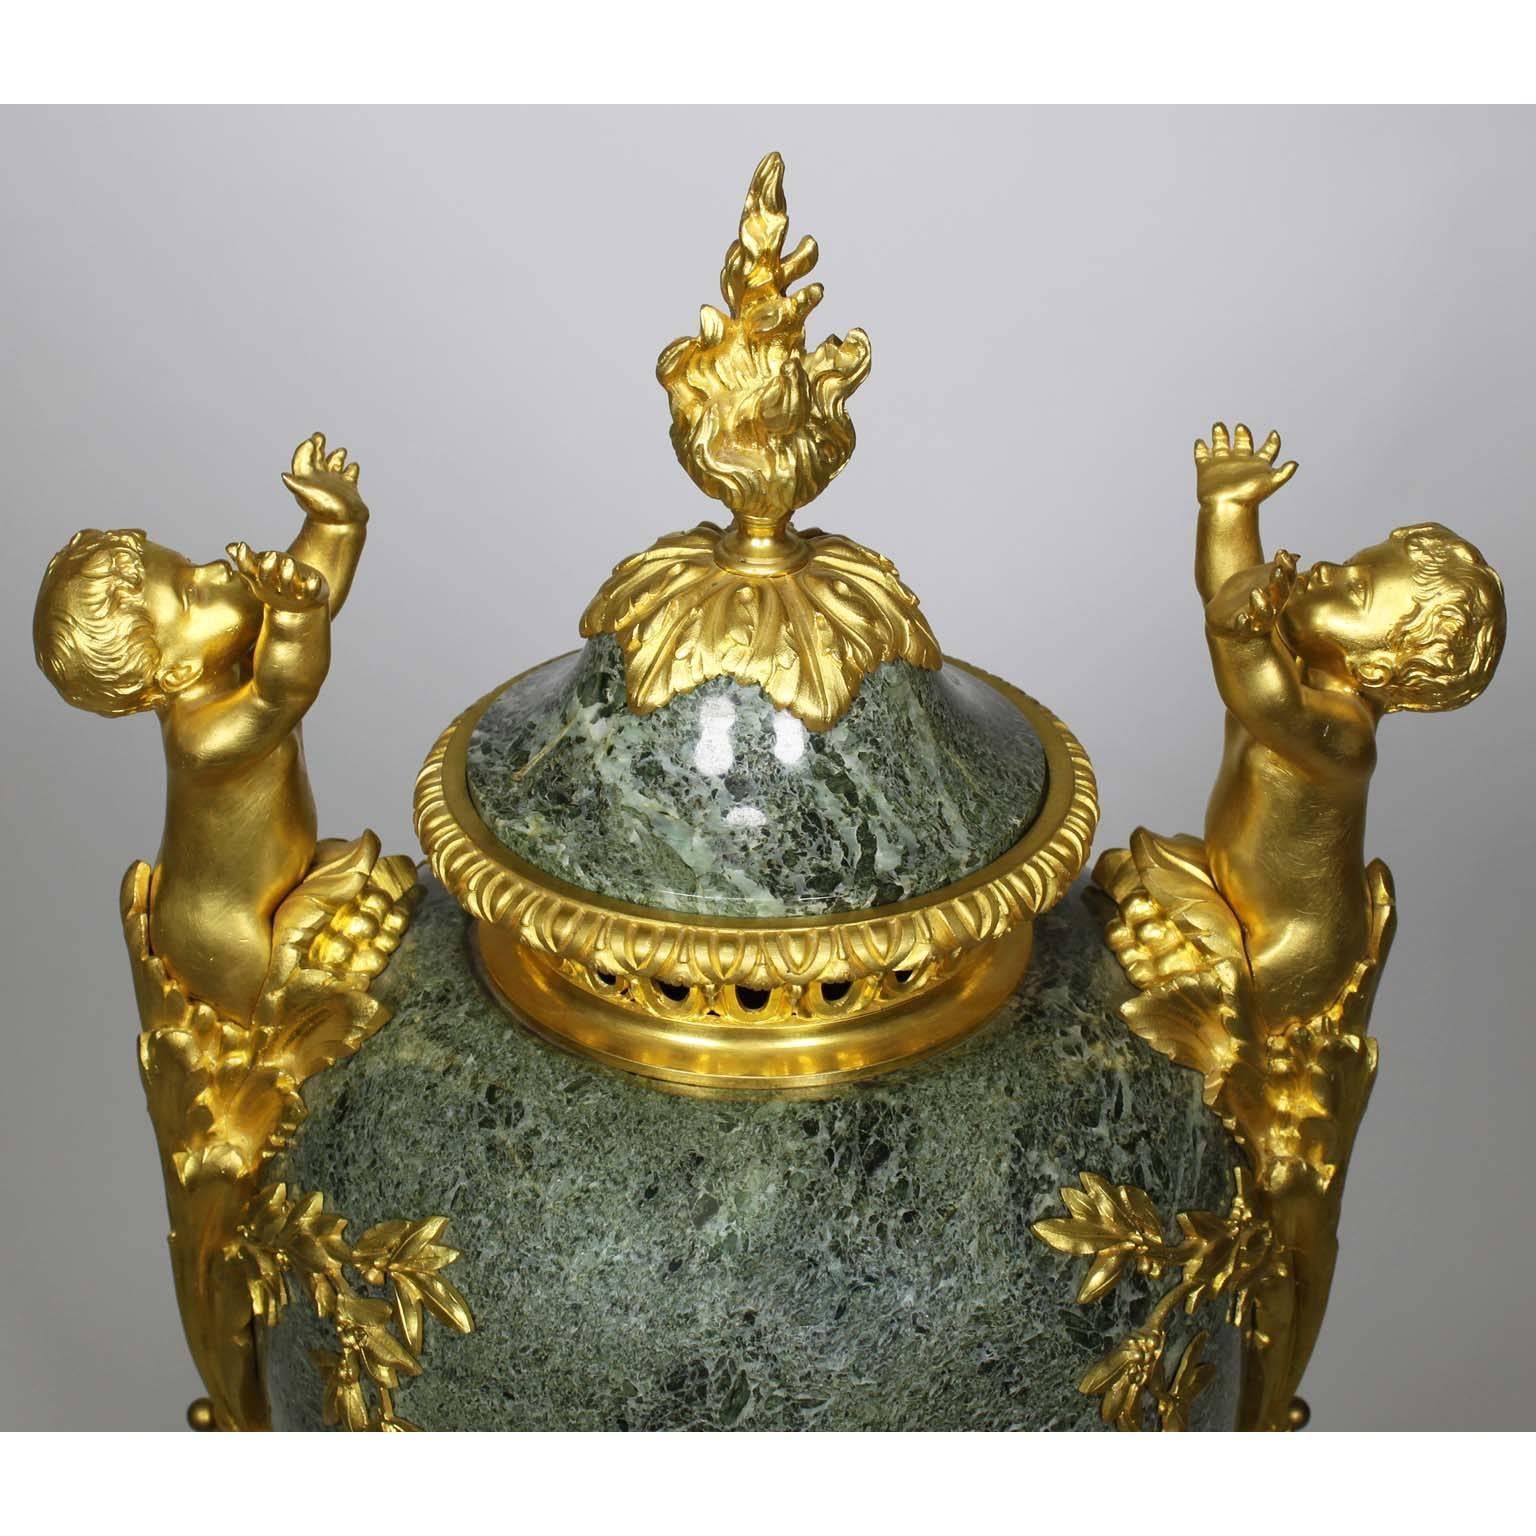 Early 20th Century French 19th-20th Century Louis XVI Style Gilt-Bronze & Marble Urn with Children For Sale